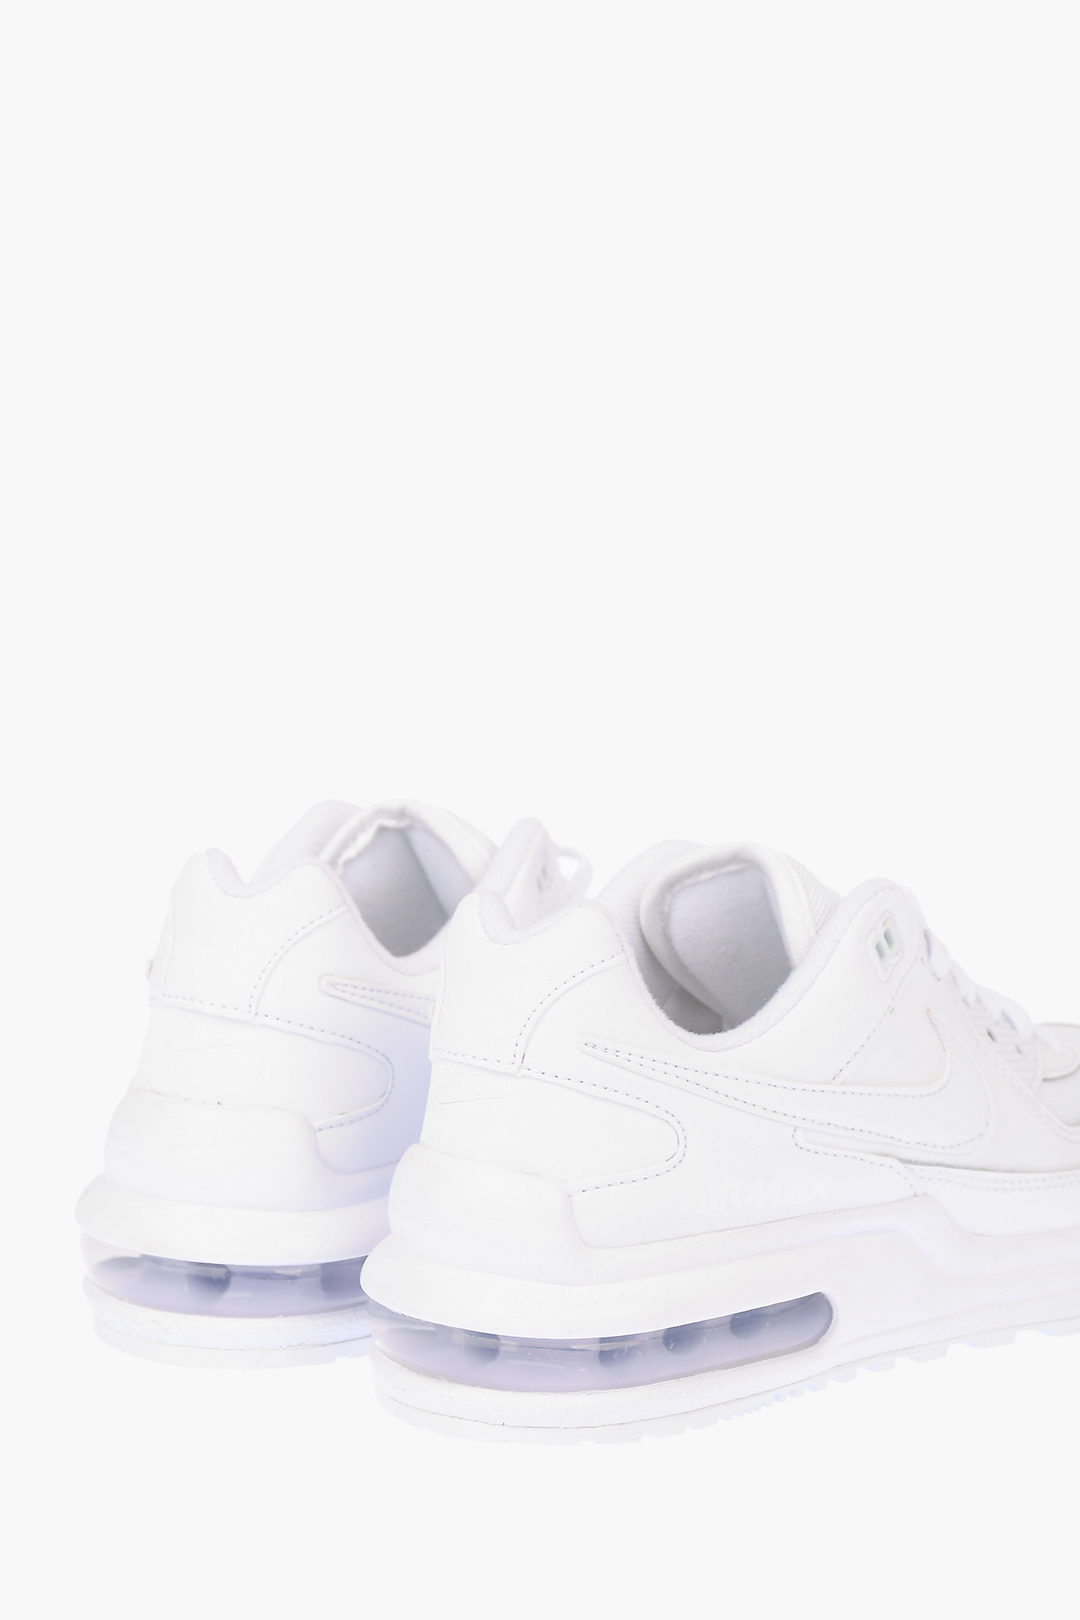 Nike and Leather AIR MAX WRIGHT Sneakers women - Outlet